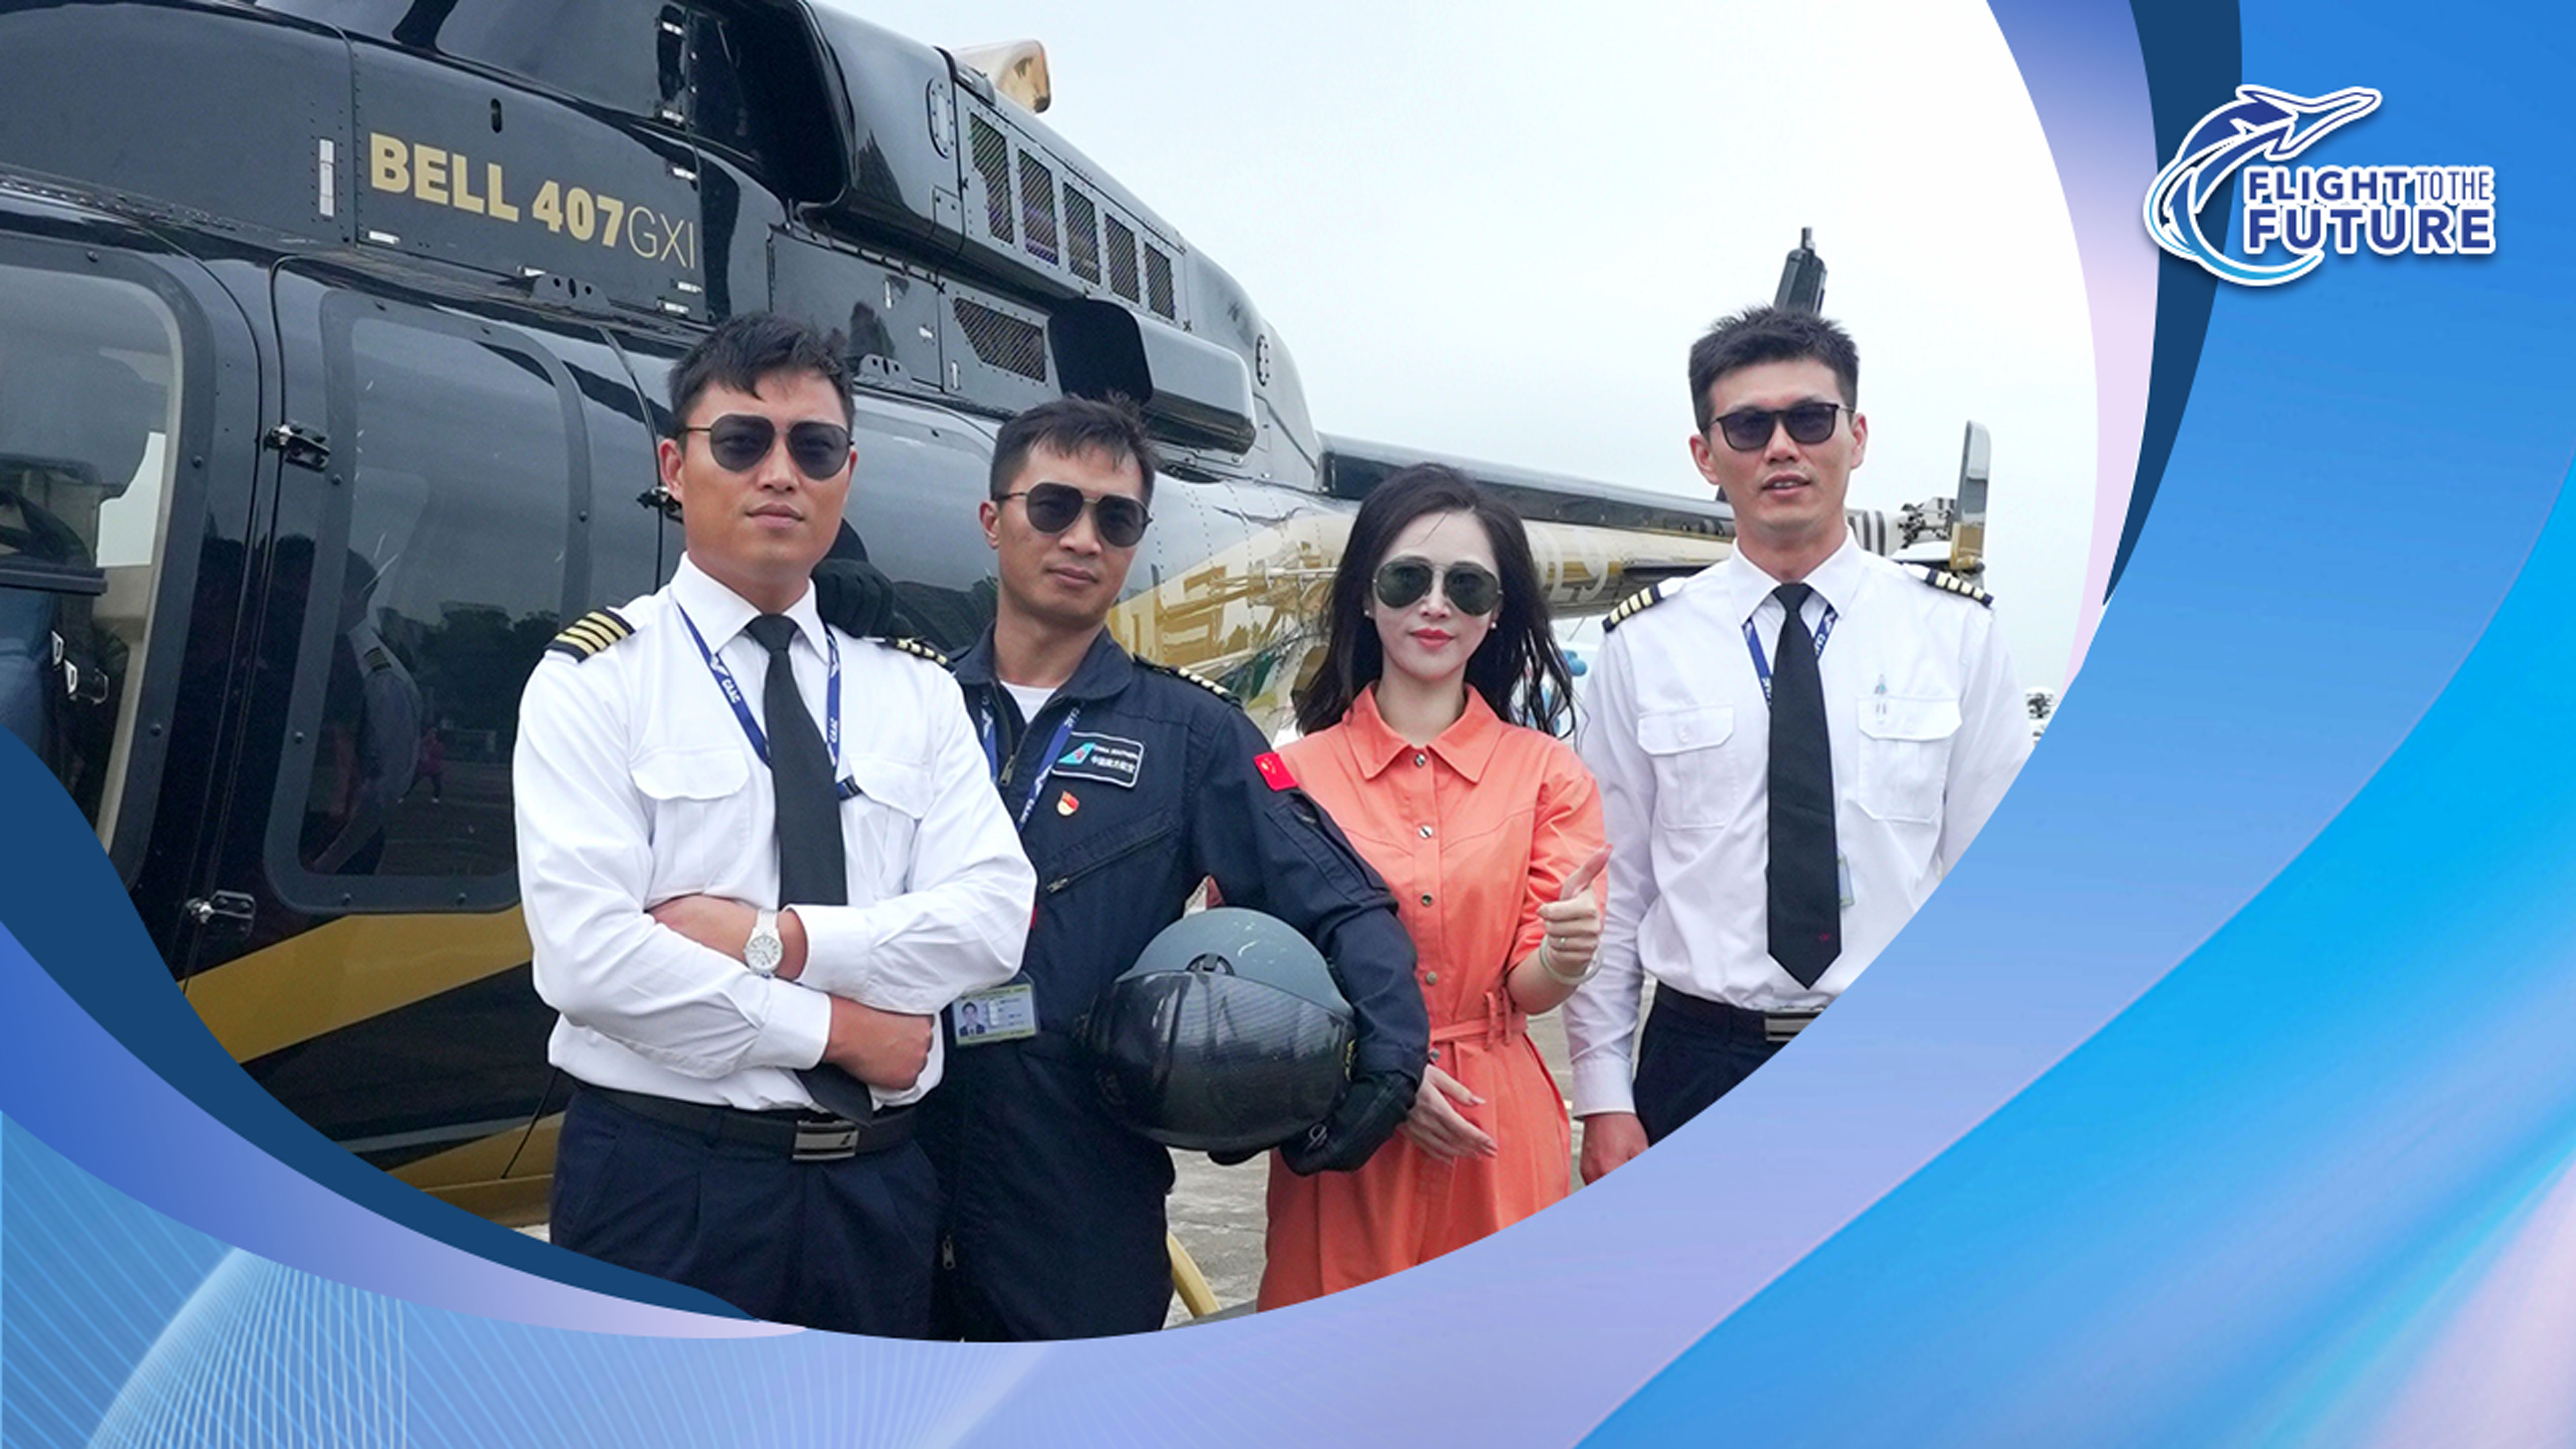 Watch: Helicopter ride in Zhuhai – exploring the development of China's general aviation industry